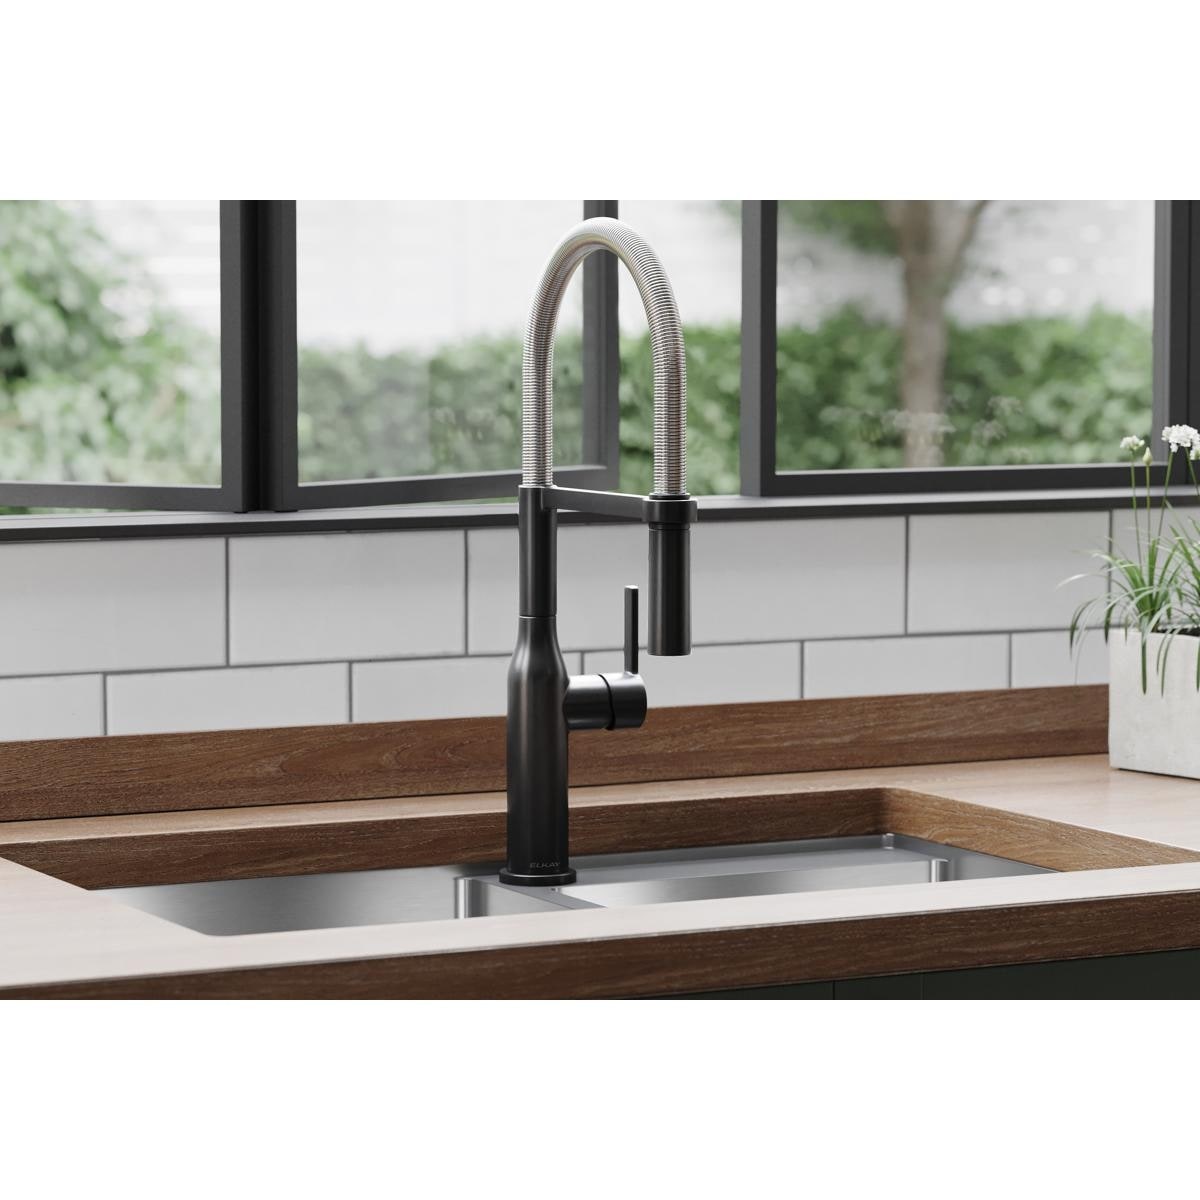 Elkay Avado Single Hole Kitchen Faucet with Semi-professional Spout and  Forward Only Lever Handle Bed Bath  Beyond 31208845